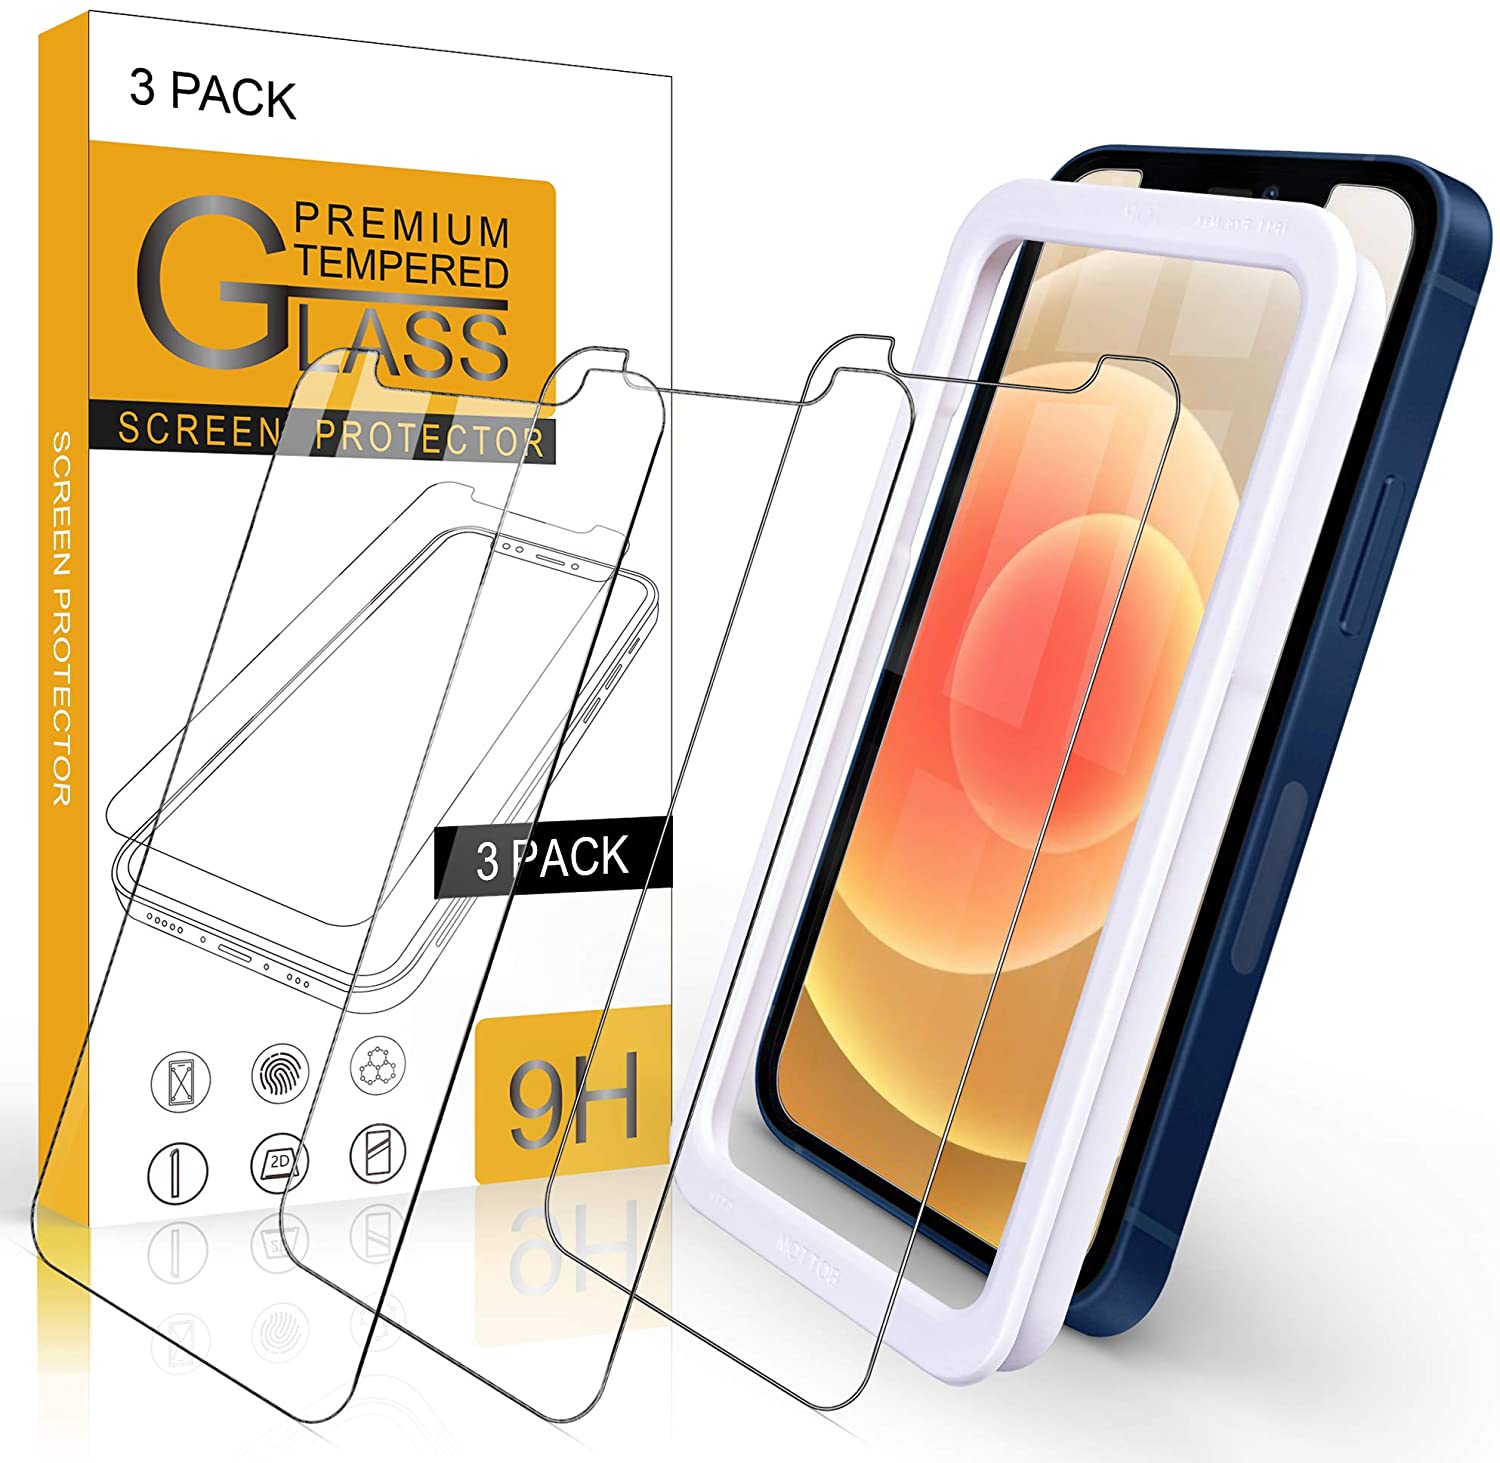 SUGIFT Screen Protector for iPhone 12 / iPhone 12 Pro 6.1 inch 3 Pack